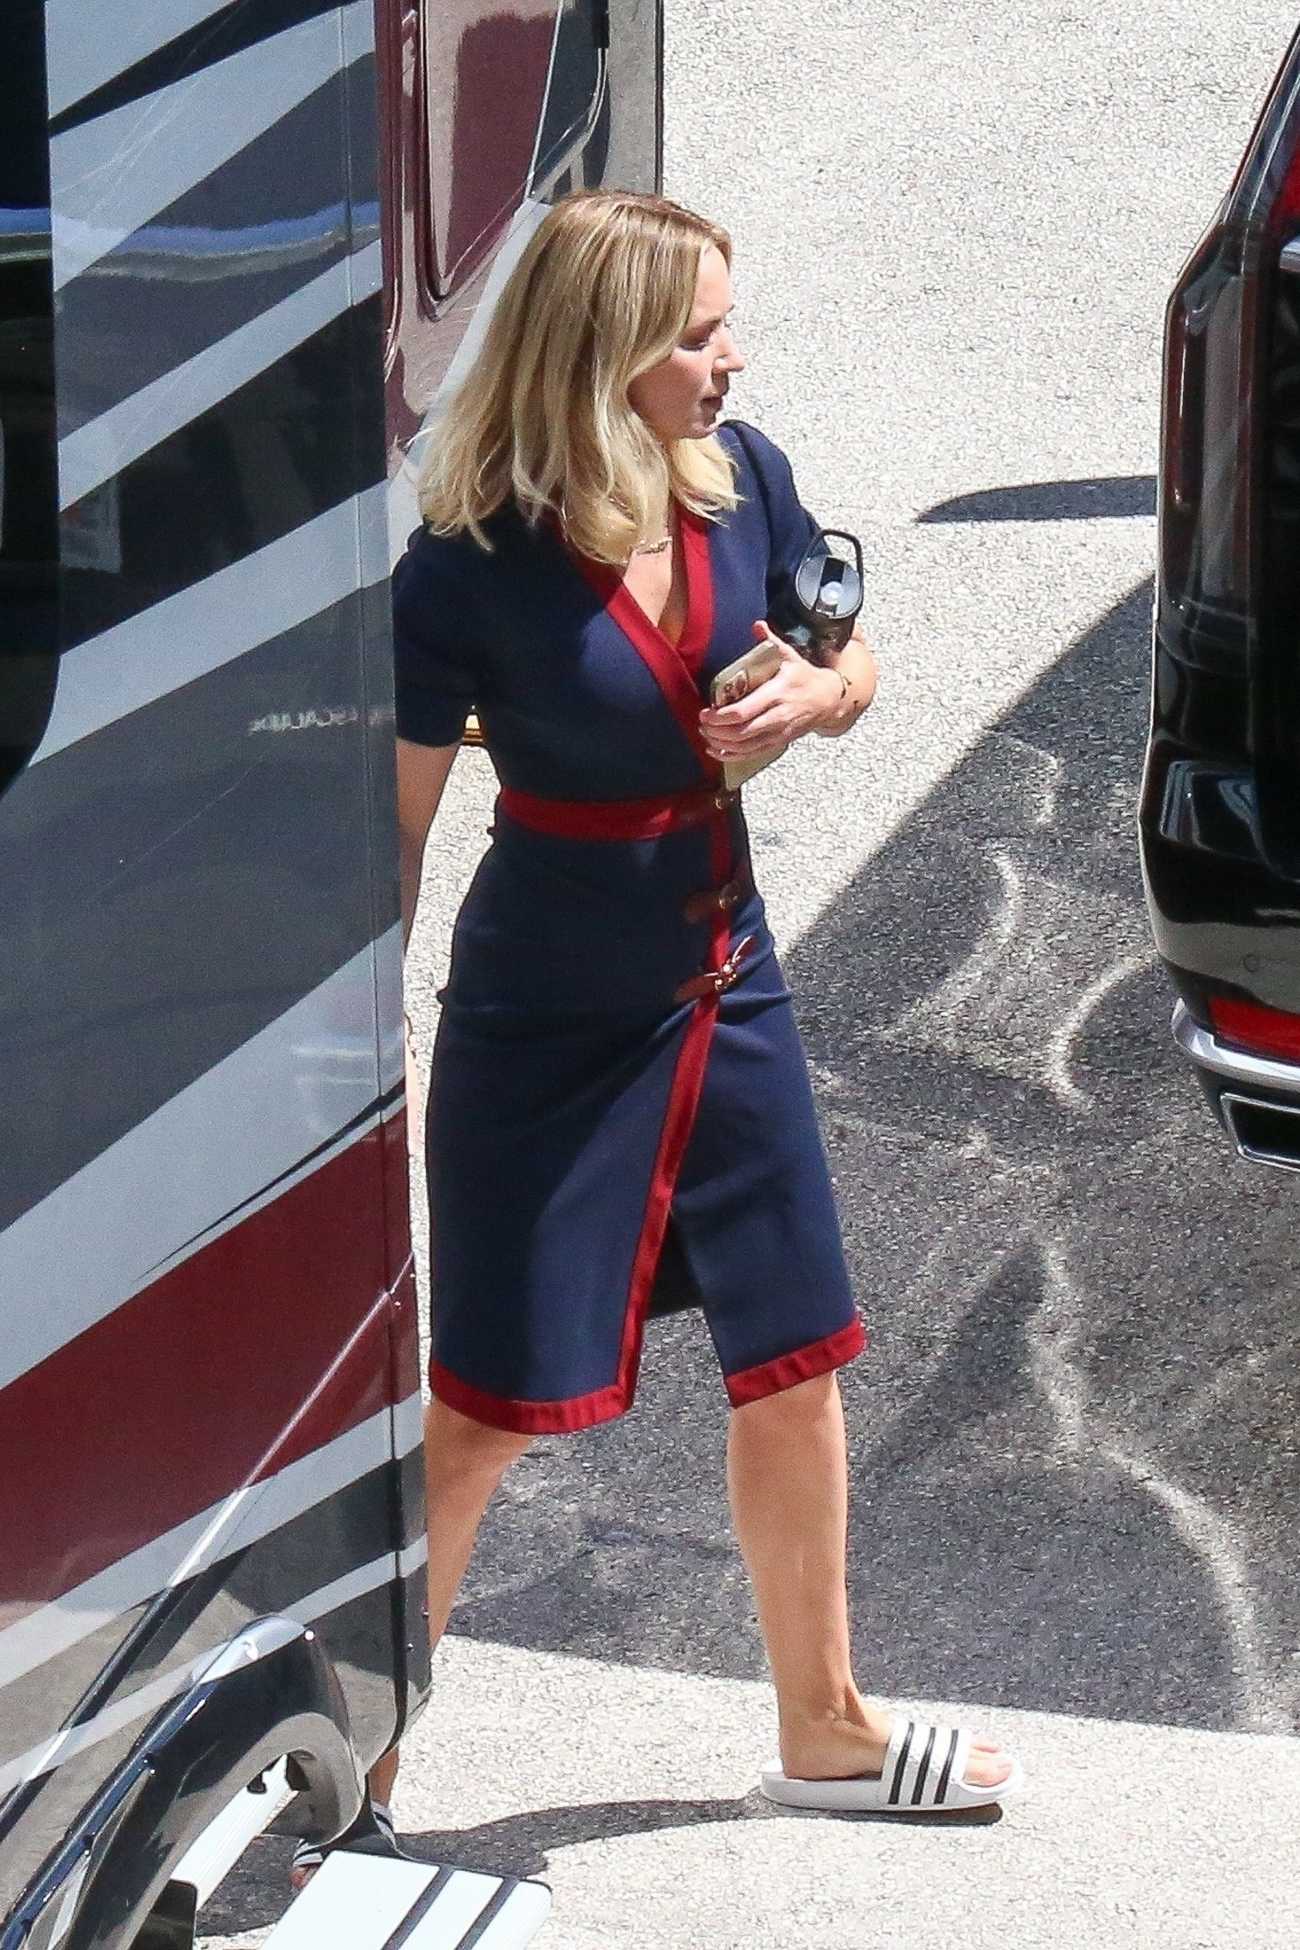 Emily_Blunt_spotted_on_set_filming_The_Pain_Hustlers_in_Miami_Aug2C_30202203.jpg